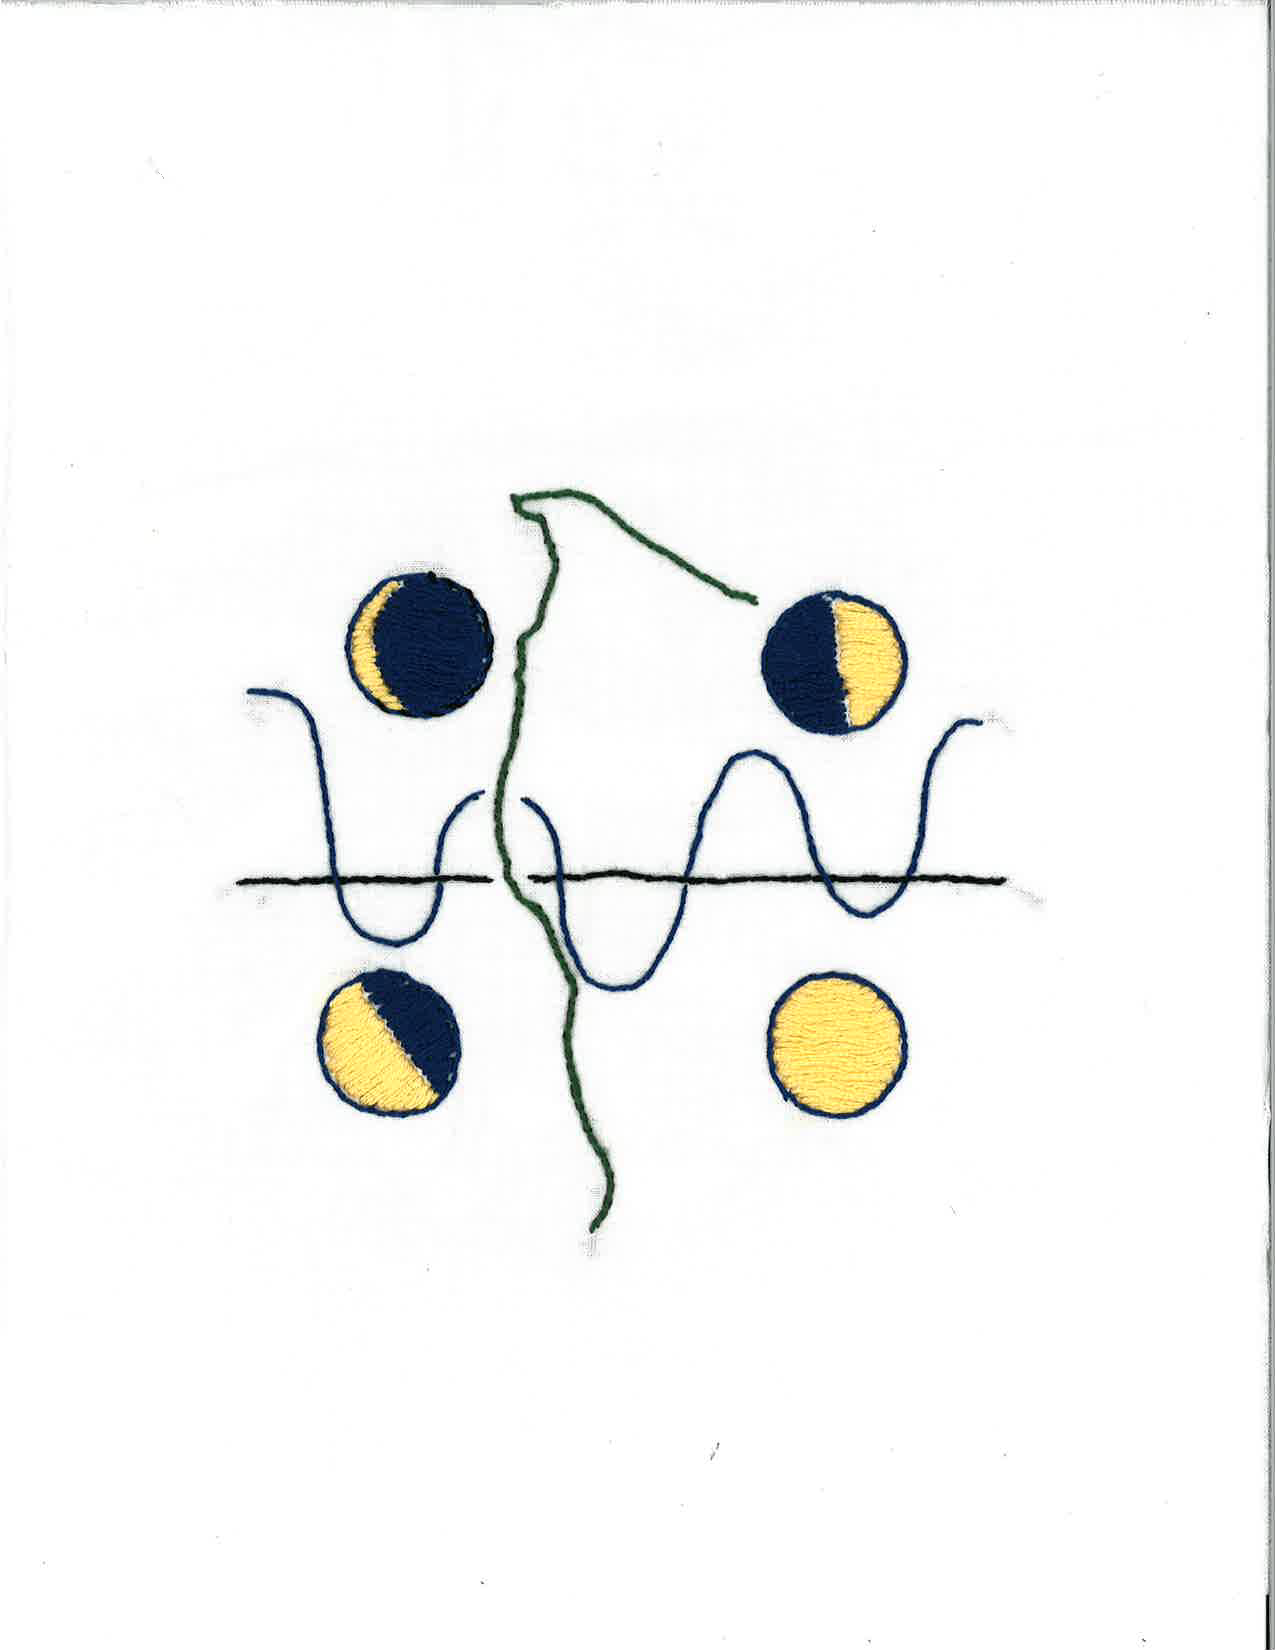 Threads embroidered on a white fabric background. Four moons in different phases surround a green outline of the Olympic Coast, and a black line and blue wave pattern representing a tide chart.